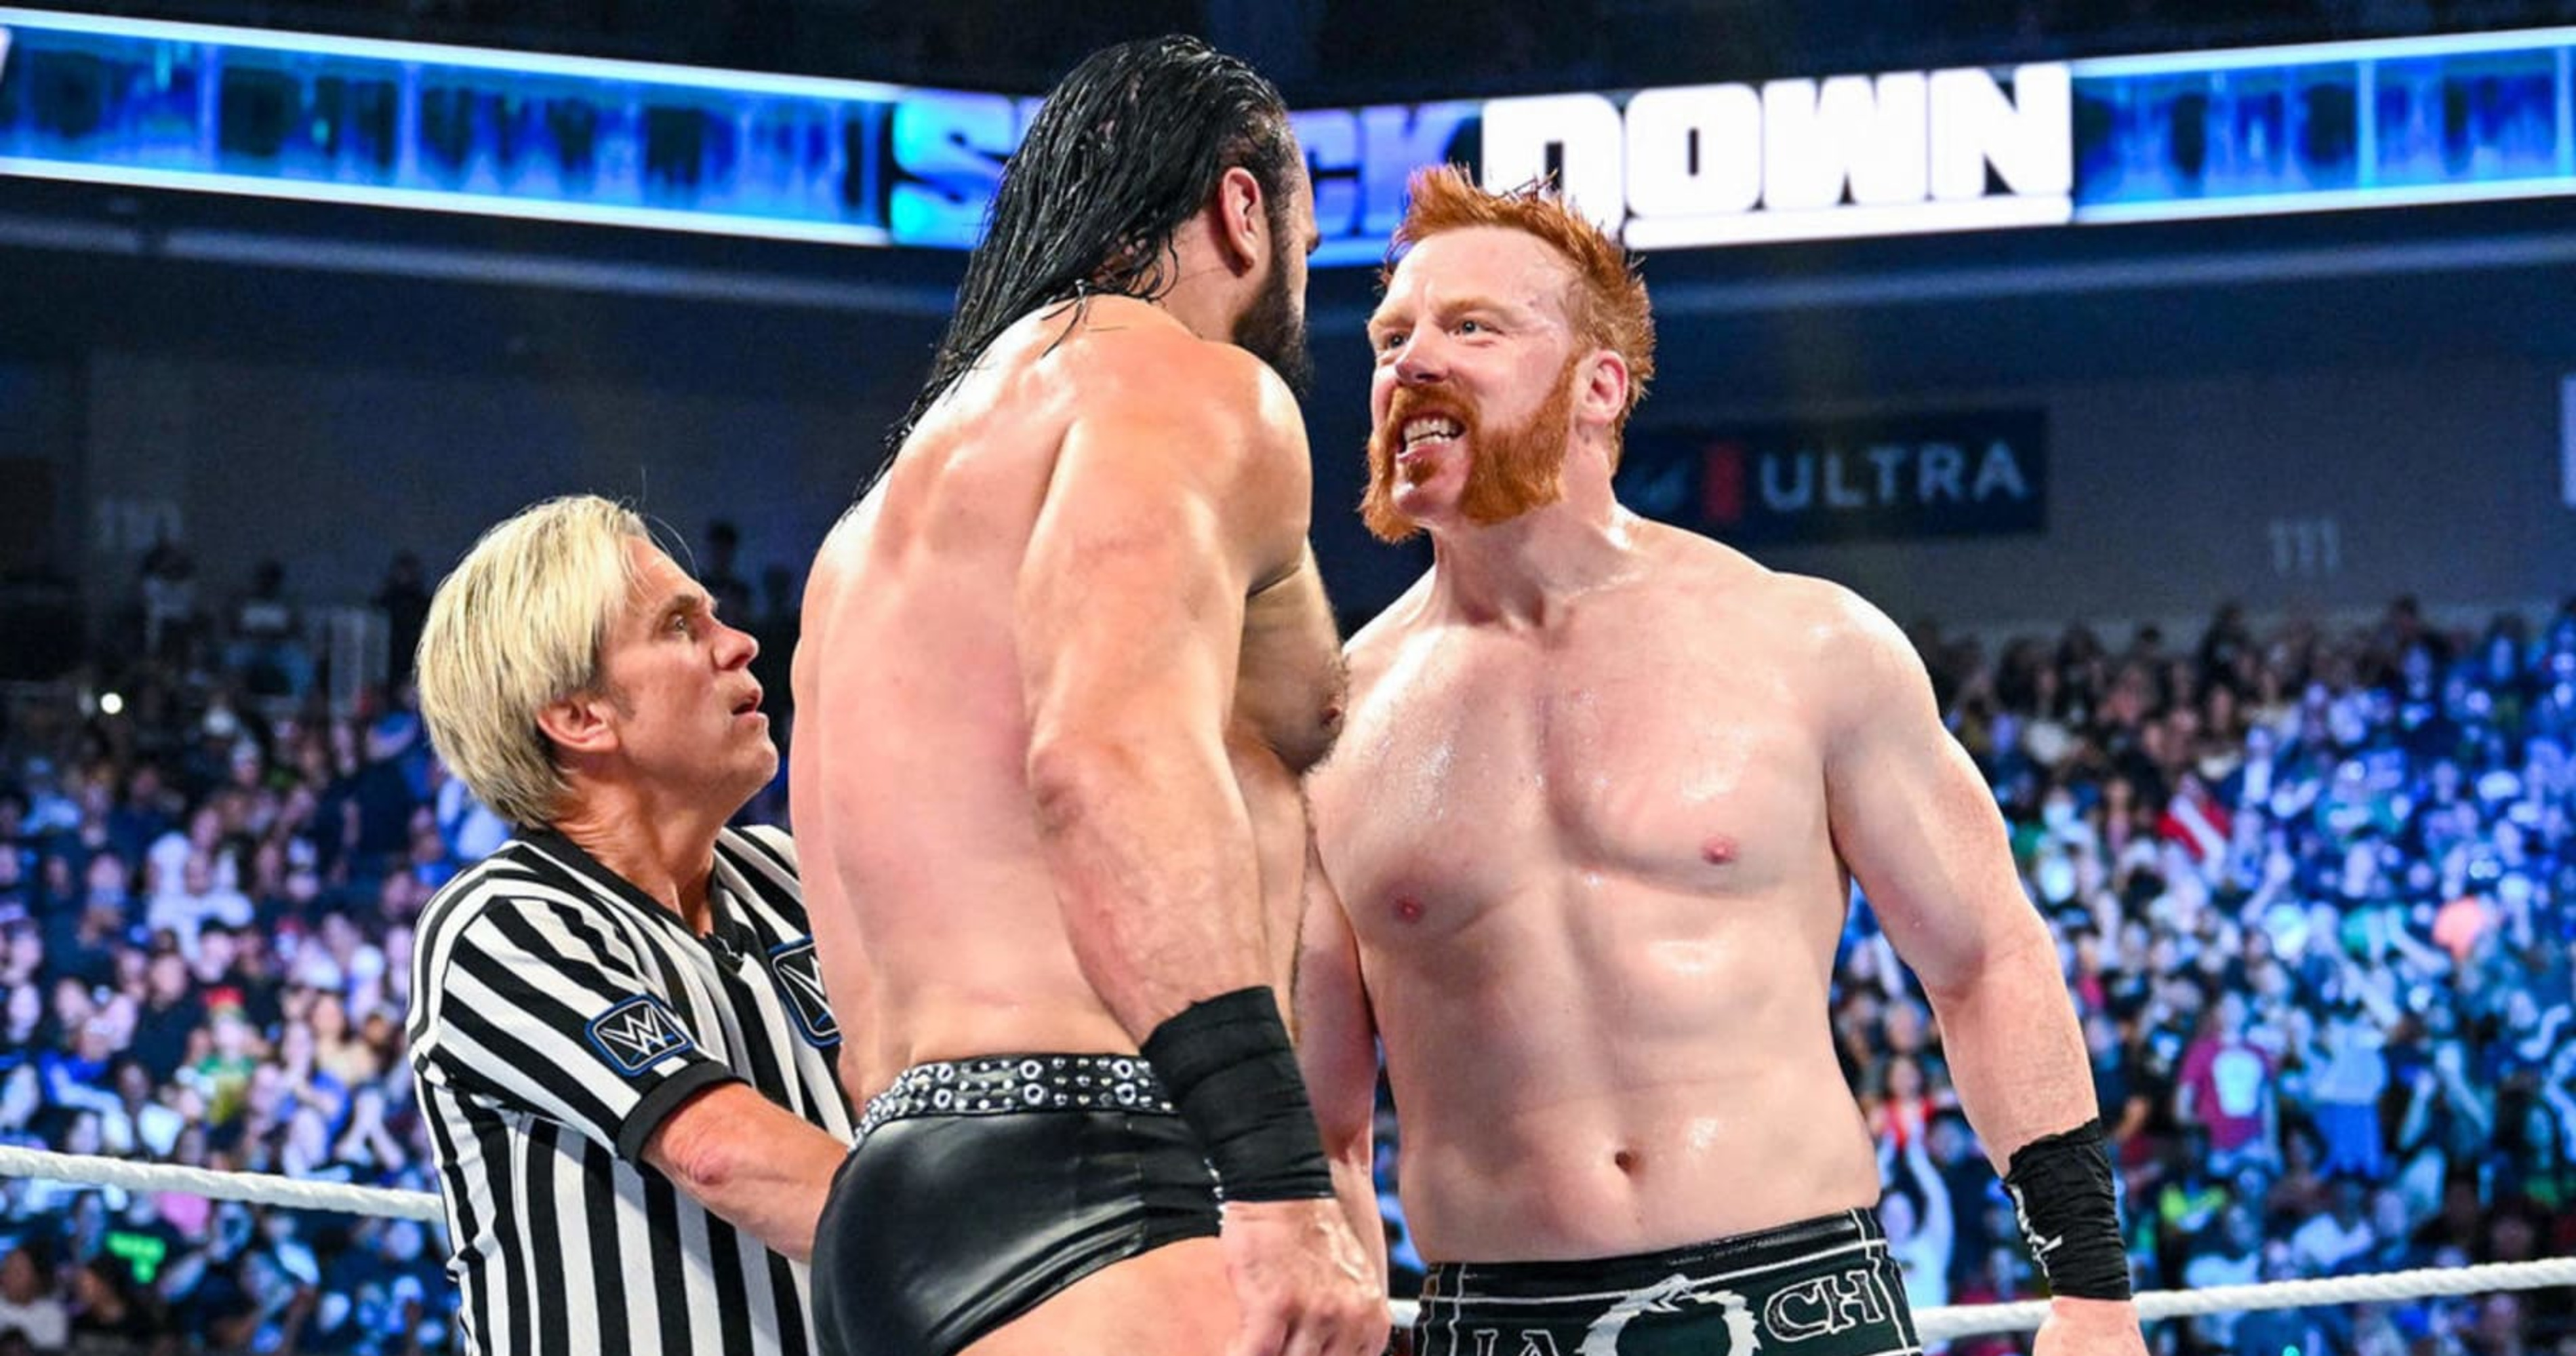 Gunther Vs Drew Mcintyre Vs Sheamus For Wwe Ic Title Set For Wrestlemania 39 News Scores 